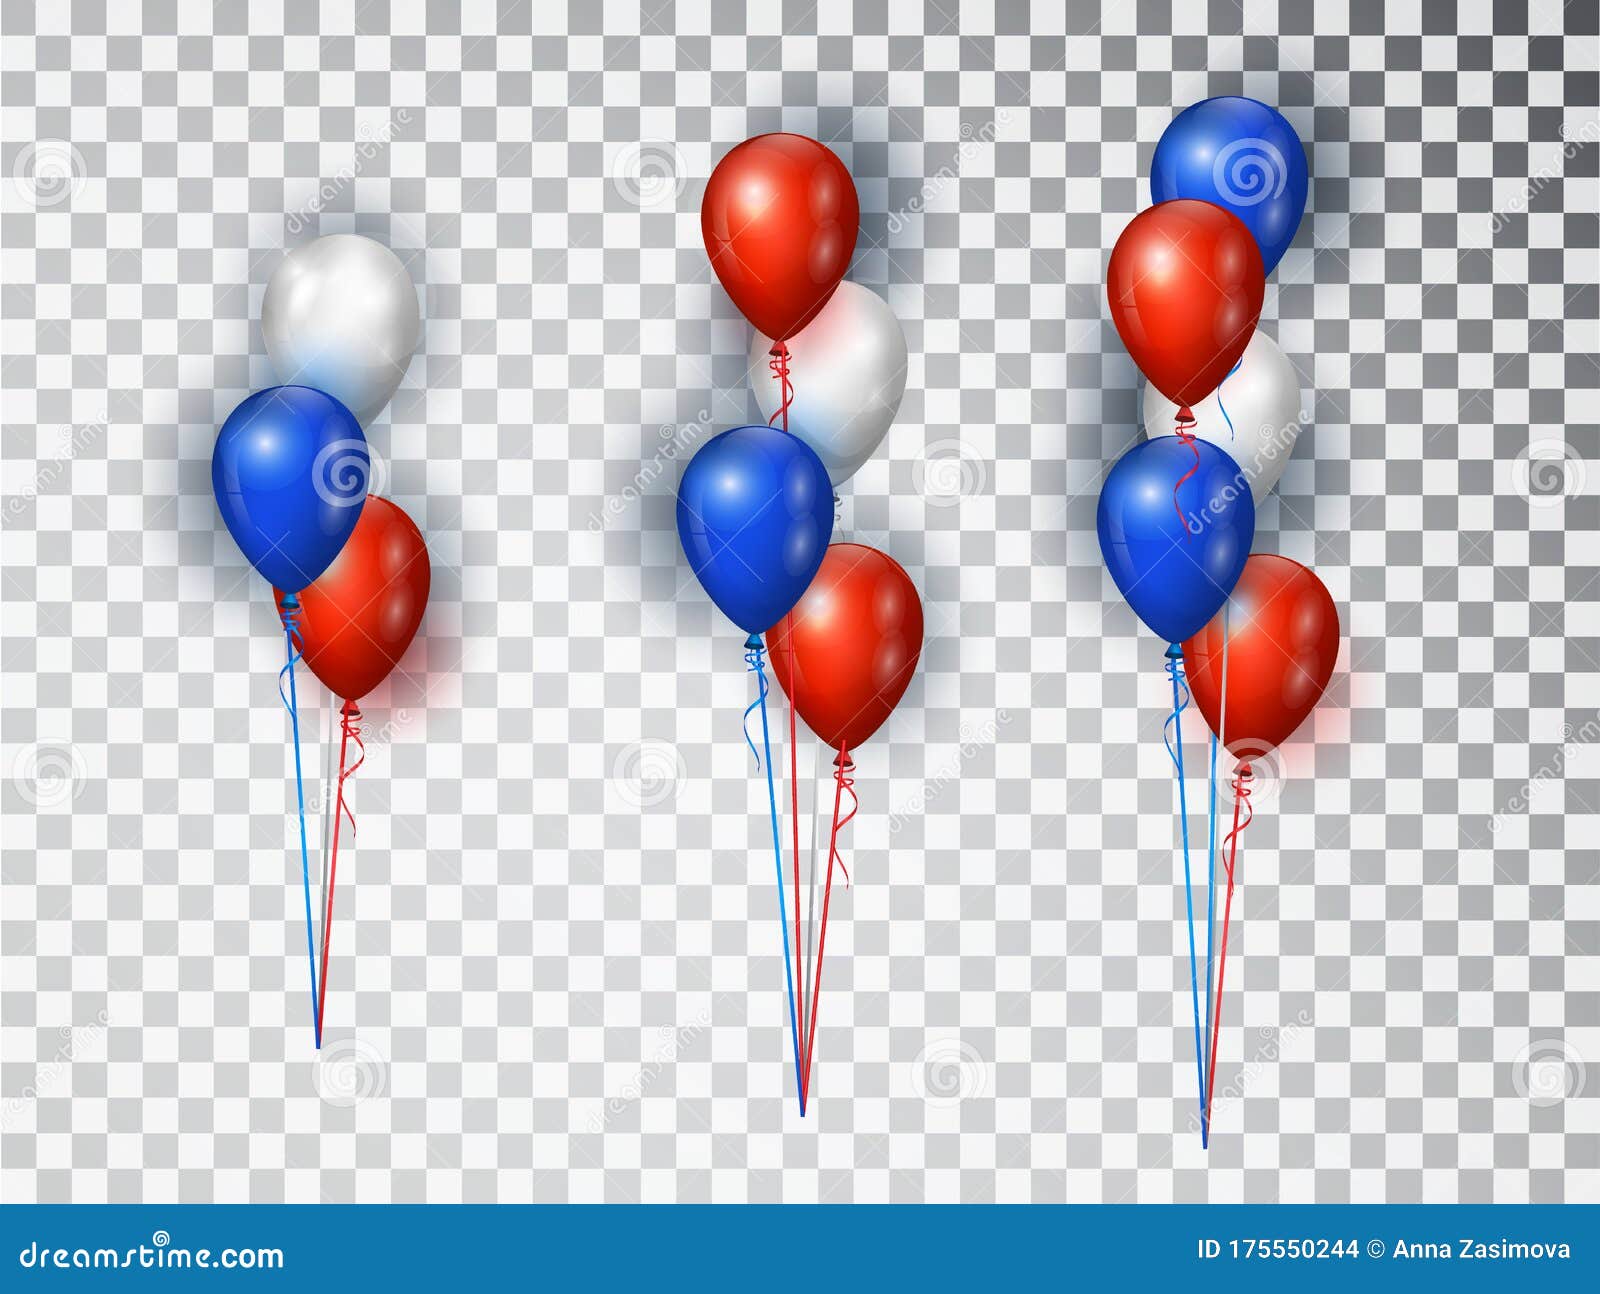 realistic balloons composicion in red, blue and white colors.  s  for national holiday backgrounds